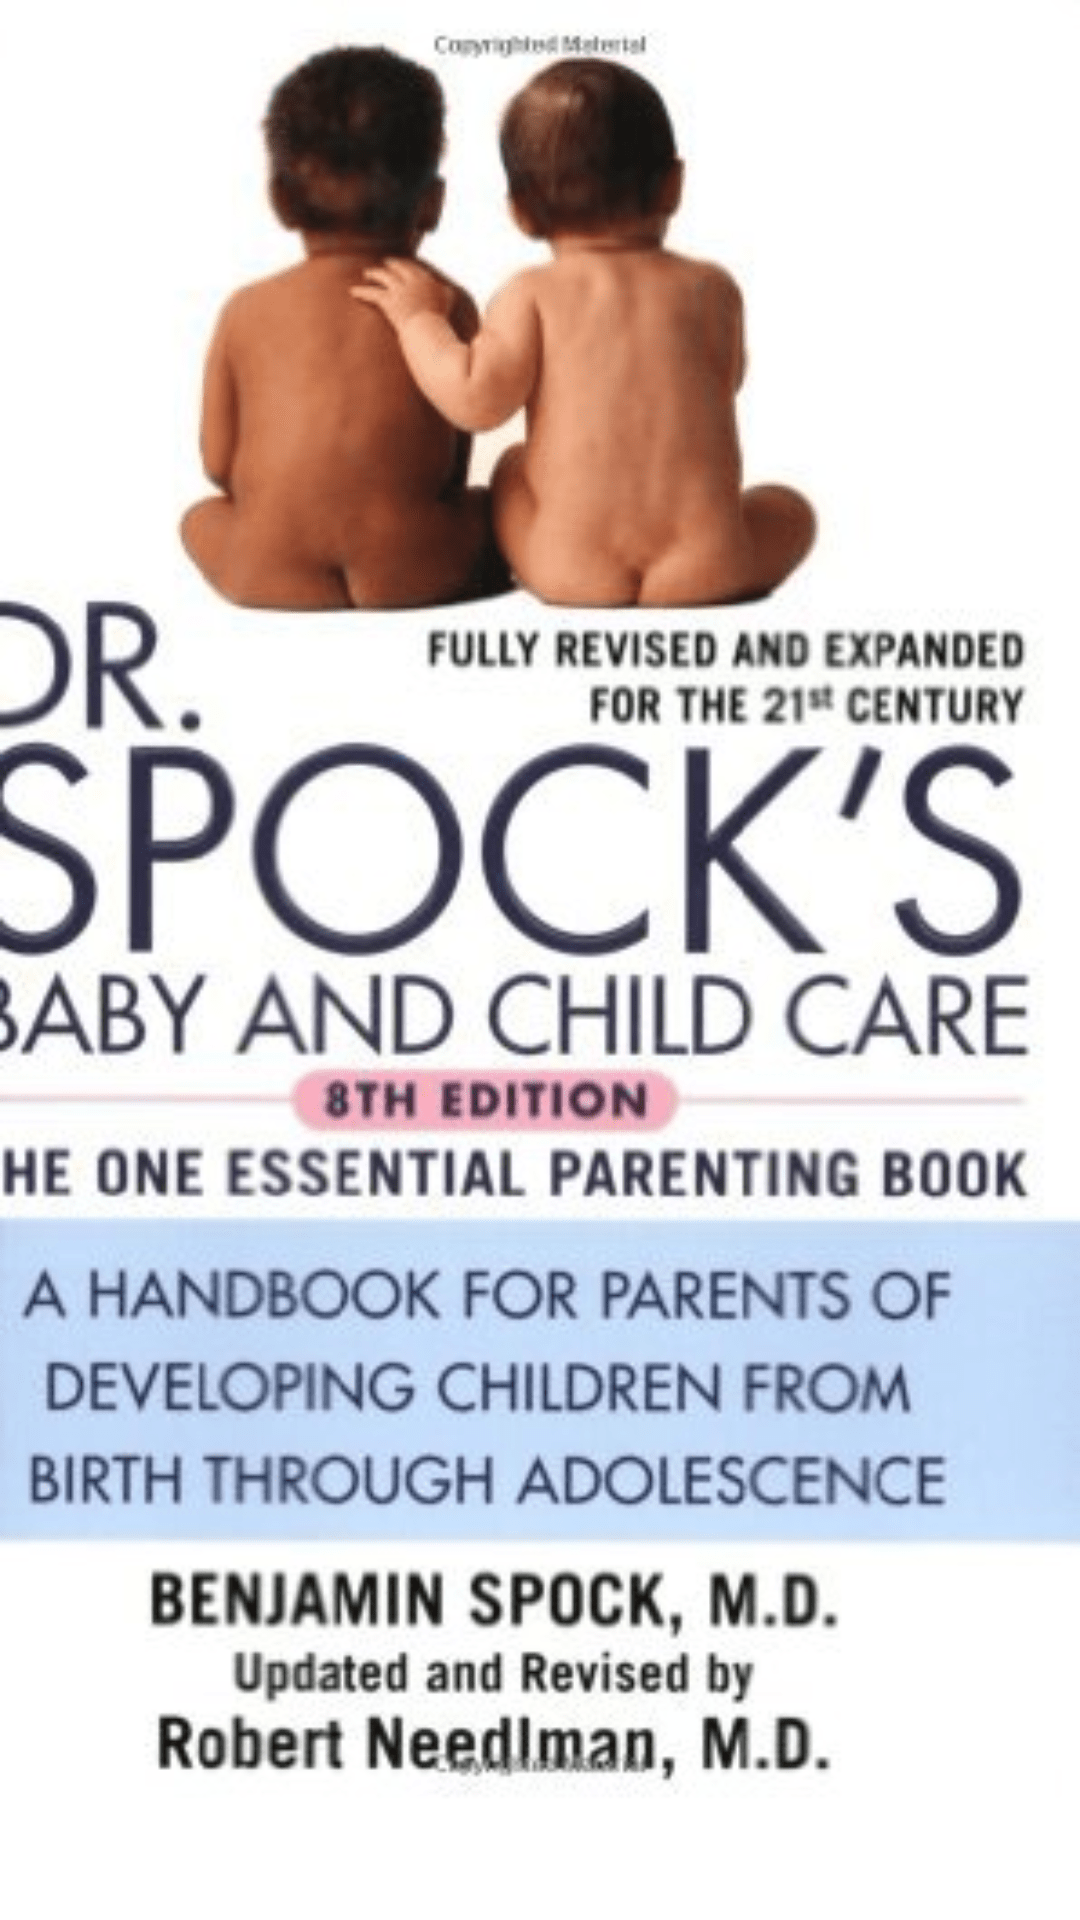 Baby and Child Care by Benjamin Spock